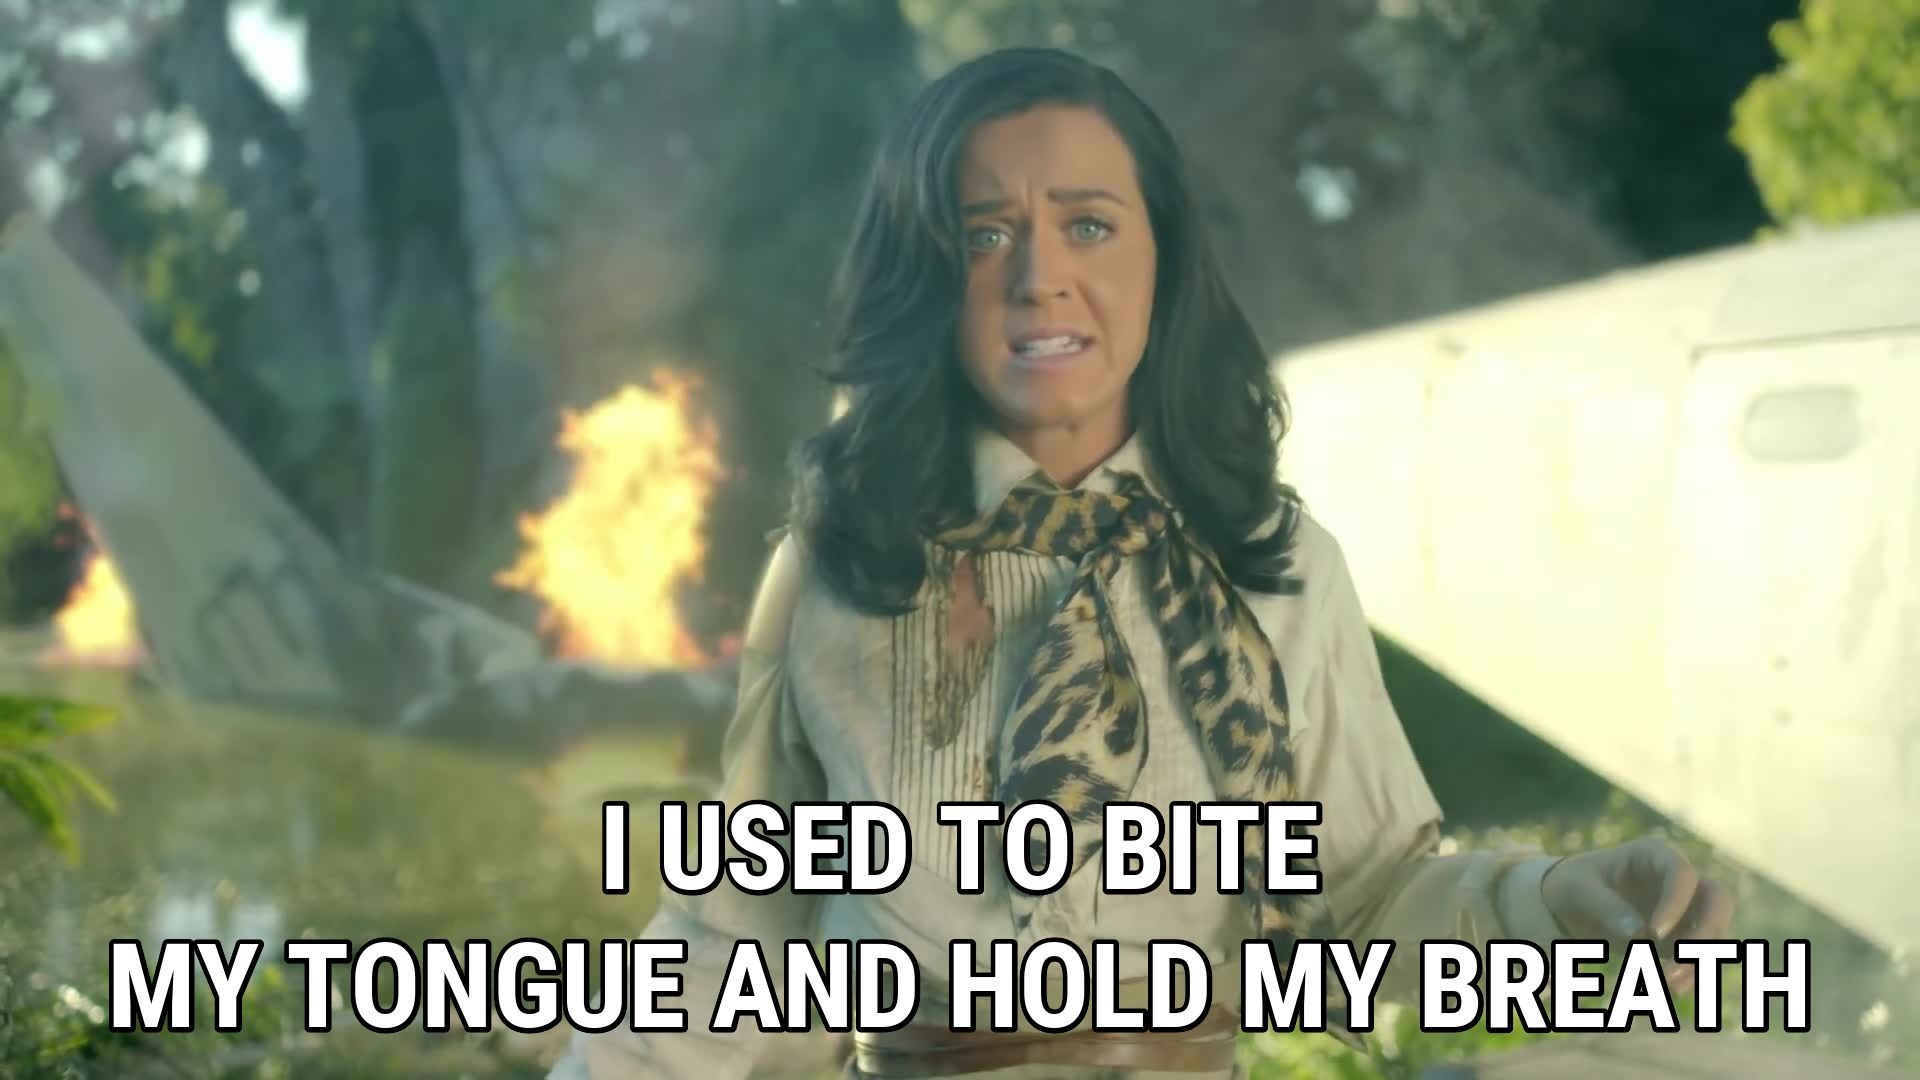 1920x1080 I used to bite my tongue and hold my breath / Katy Perry